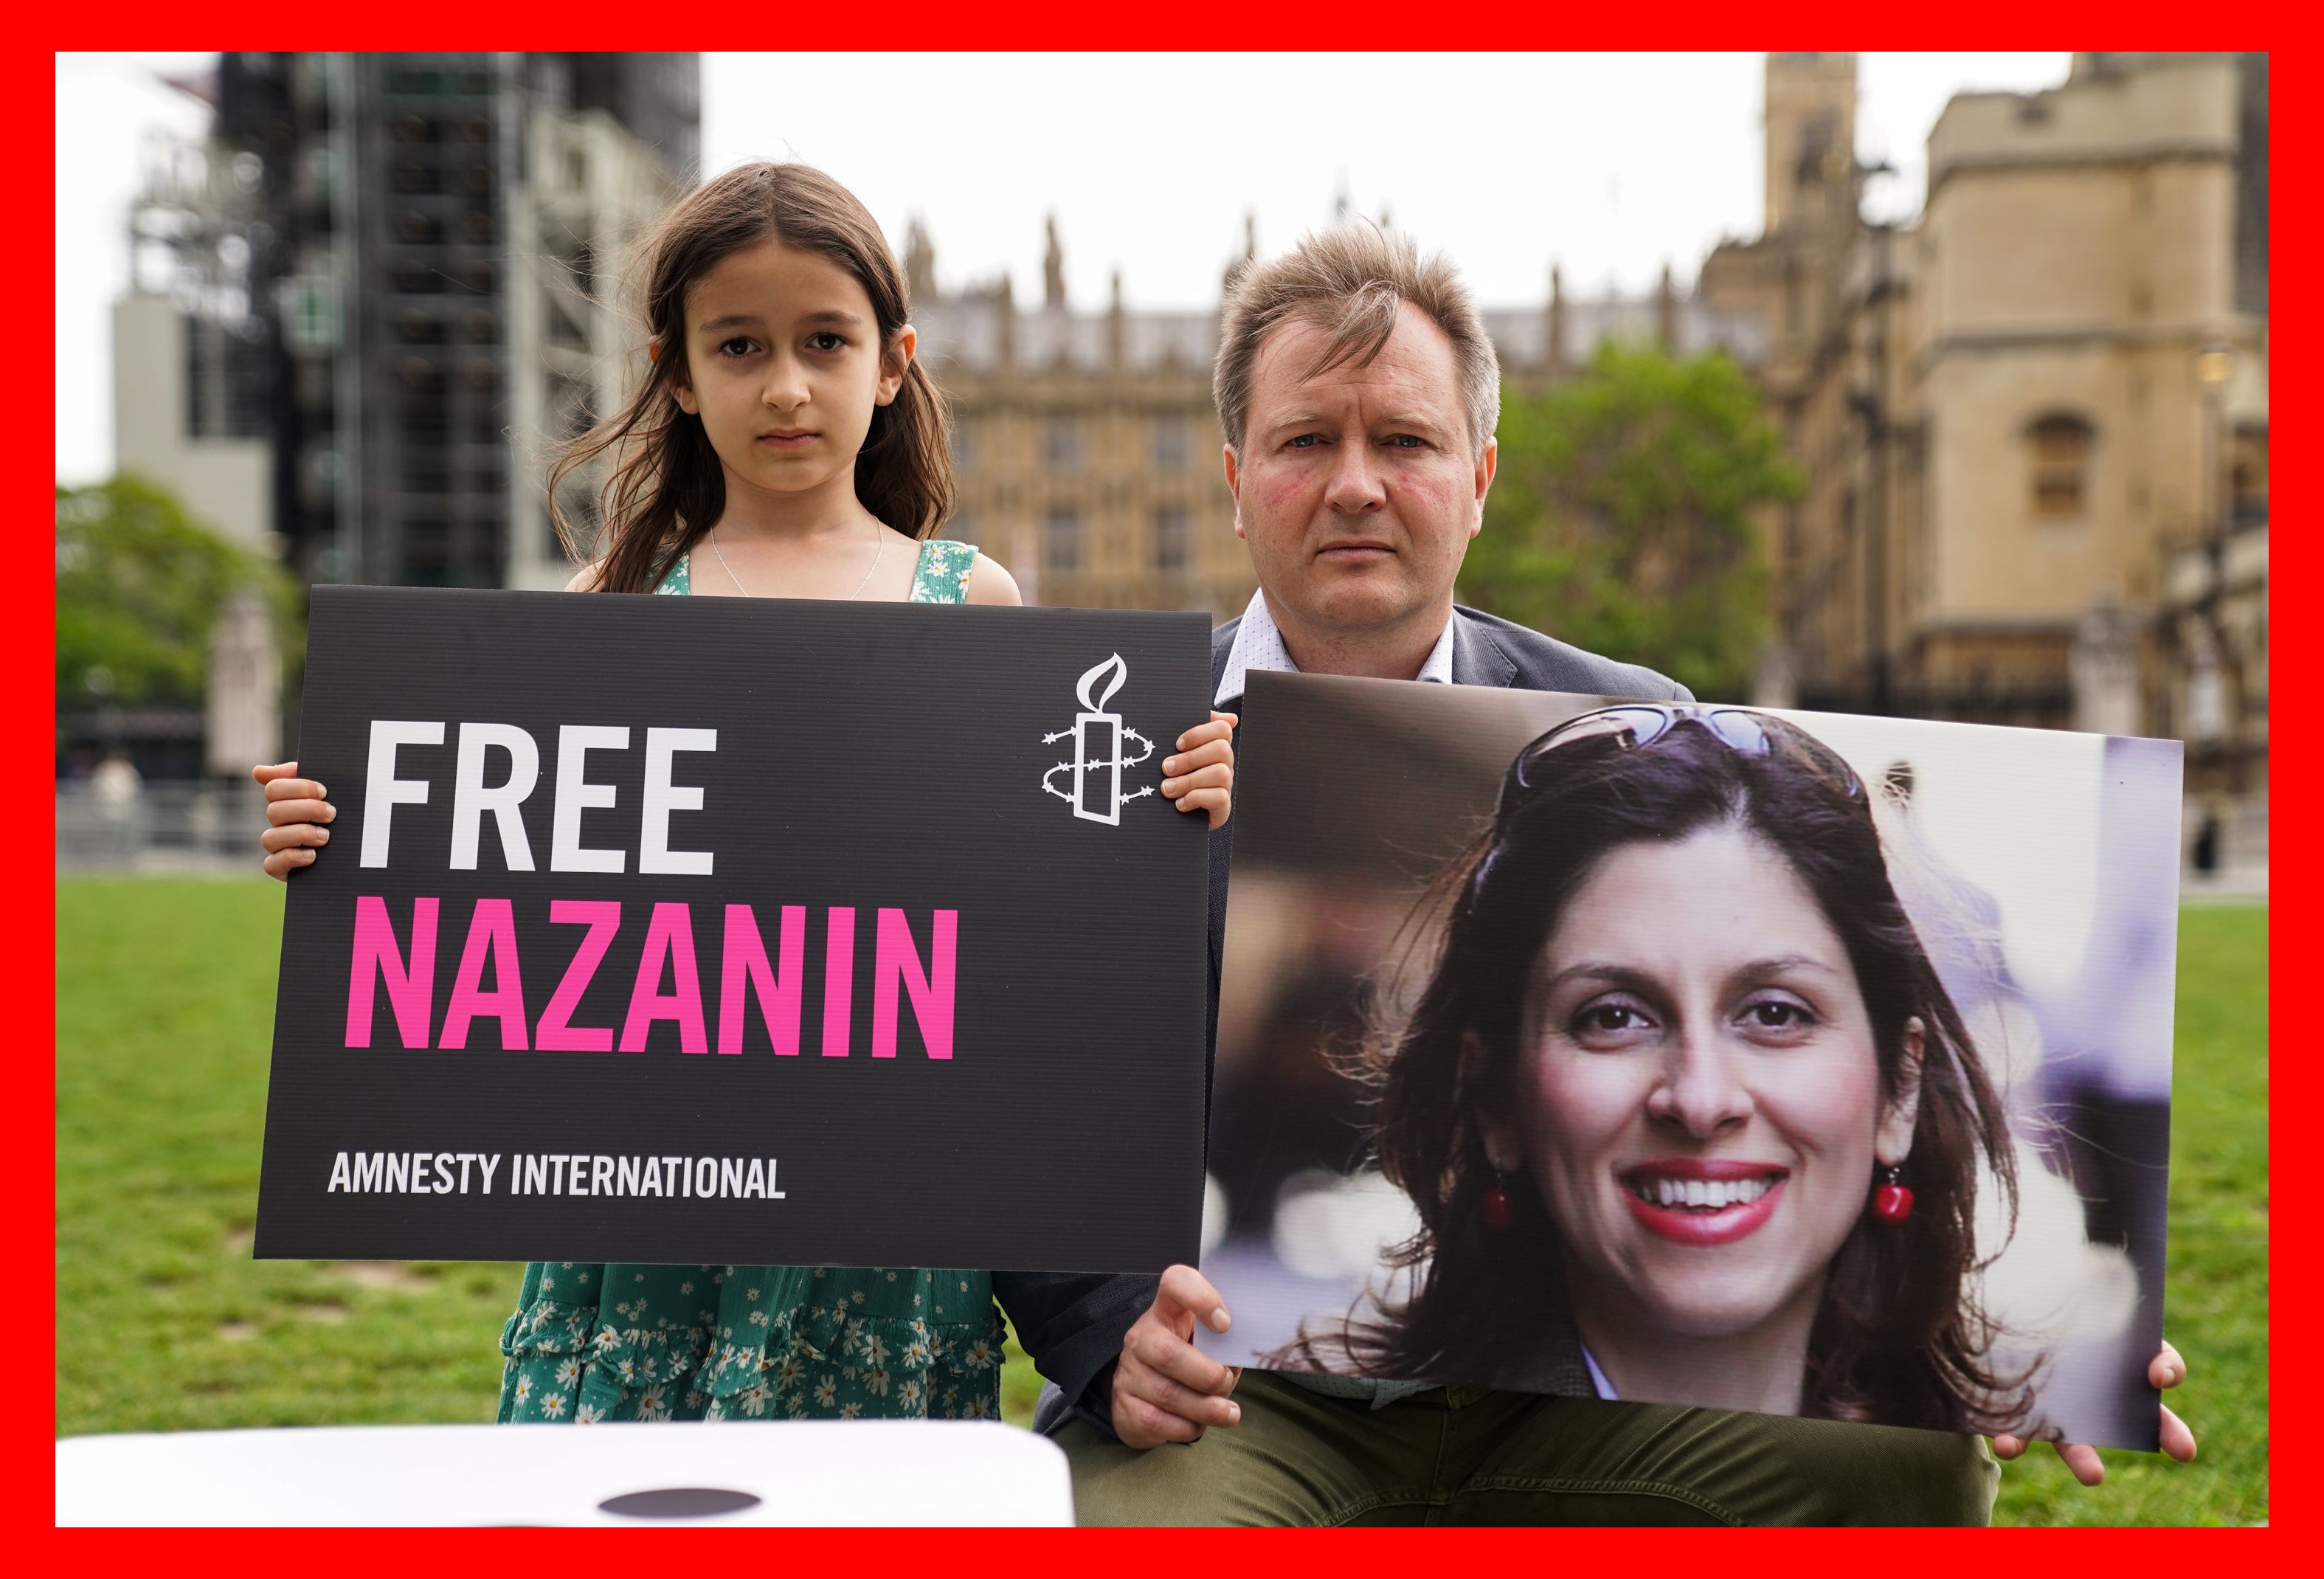 Richard Ratcliffe and his daughter, Gabriella, protest in Parliament Square, London about the continued detention of Nazanin Zaghari-Ratcliffe (Kirsty O’Connor/PA)